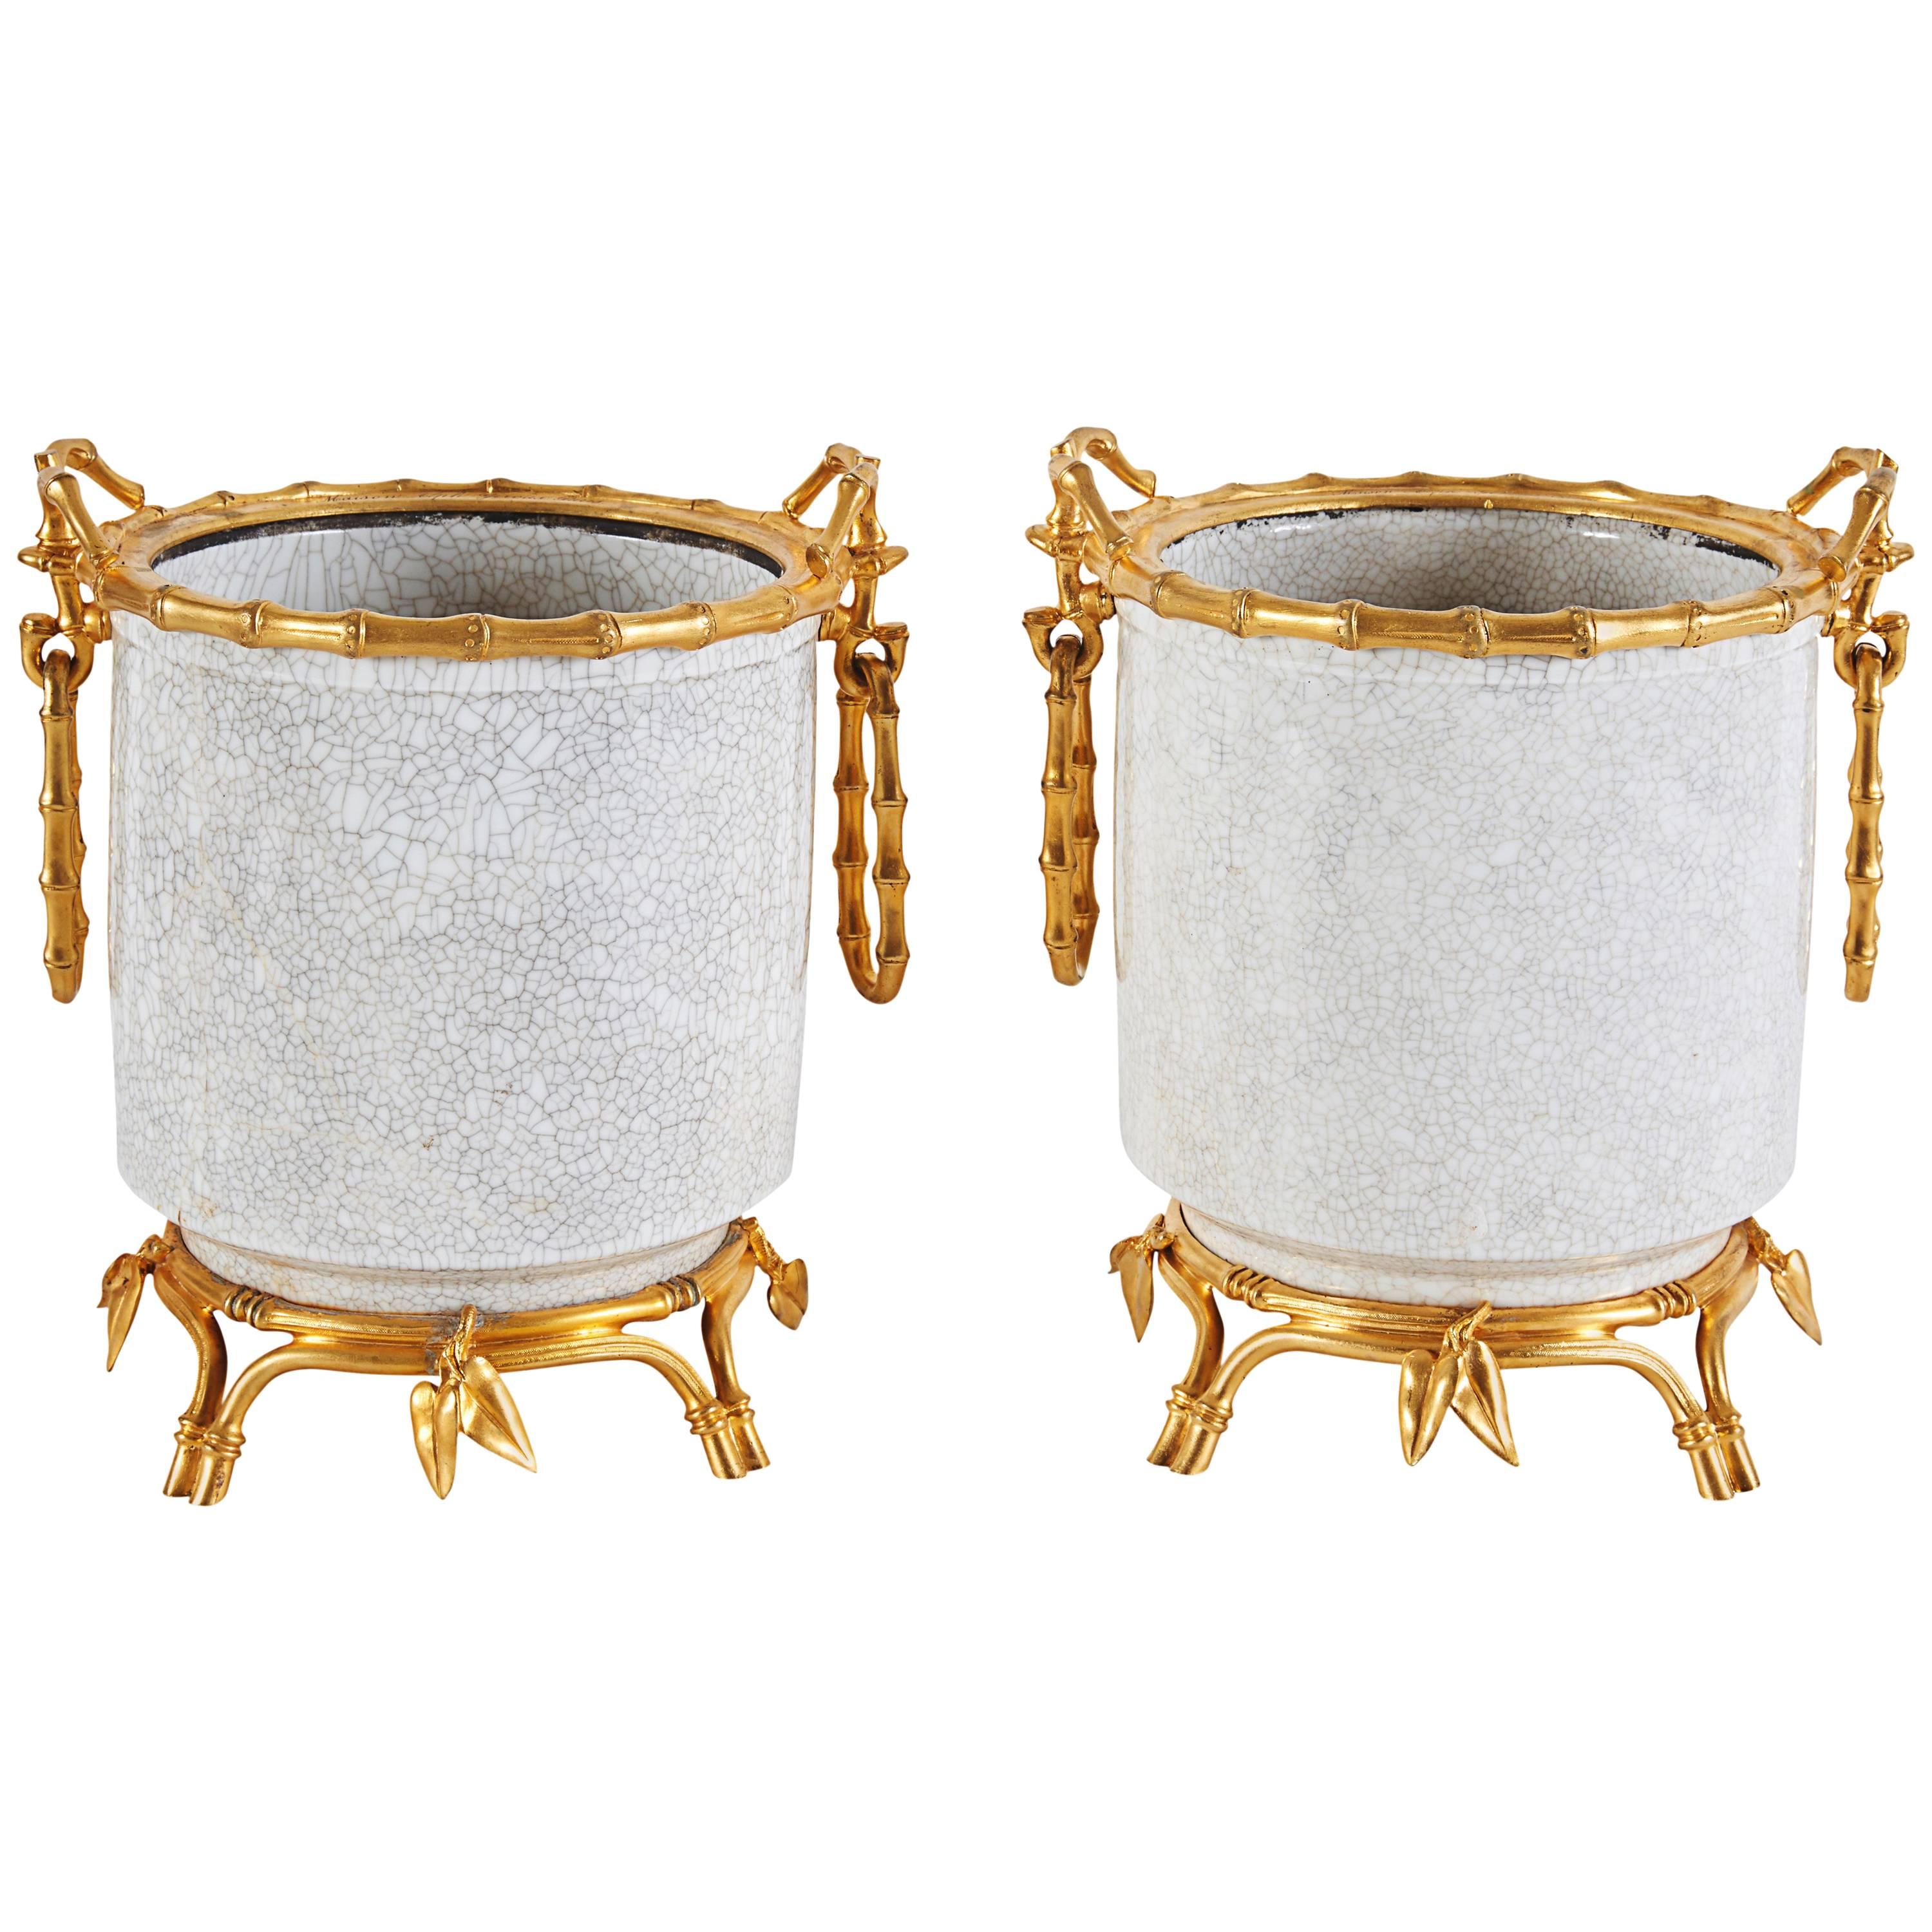 French Japonsime Ormolu-Mounted Chinese Crackle Glaze Porcelain Cachepots, Pair